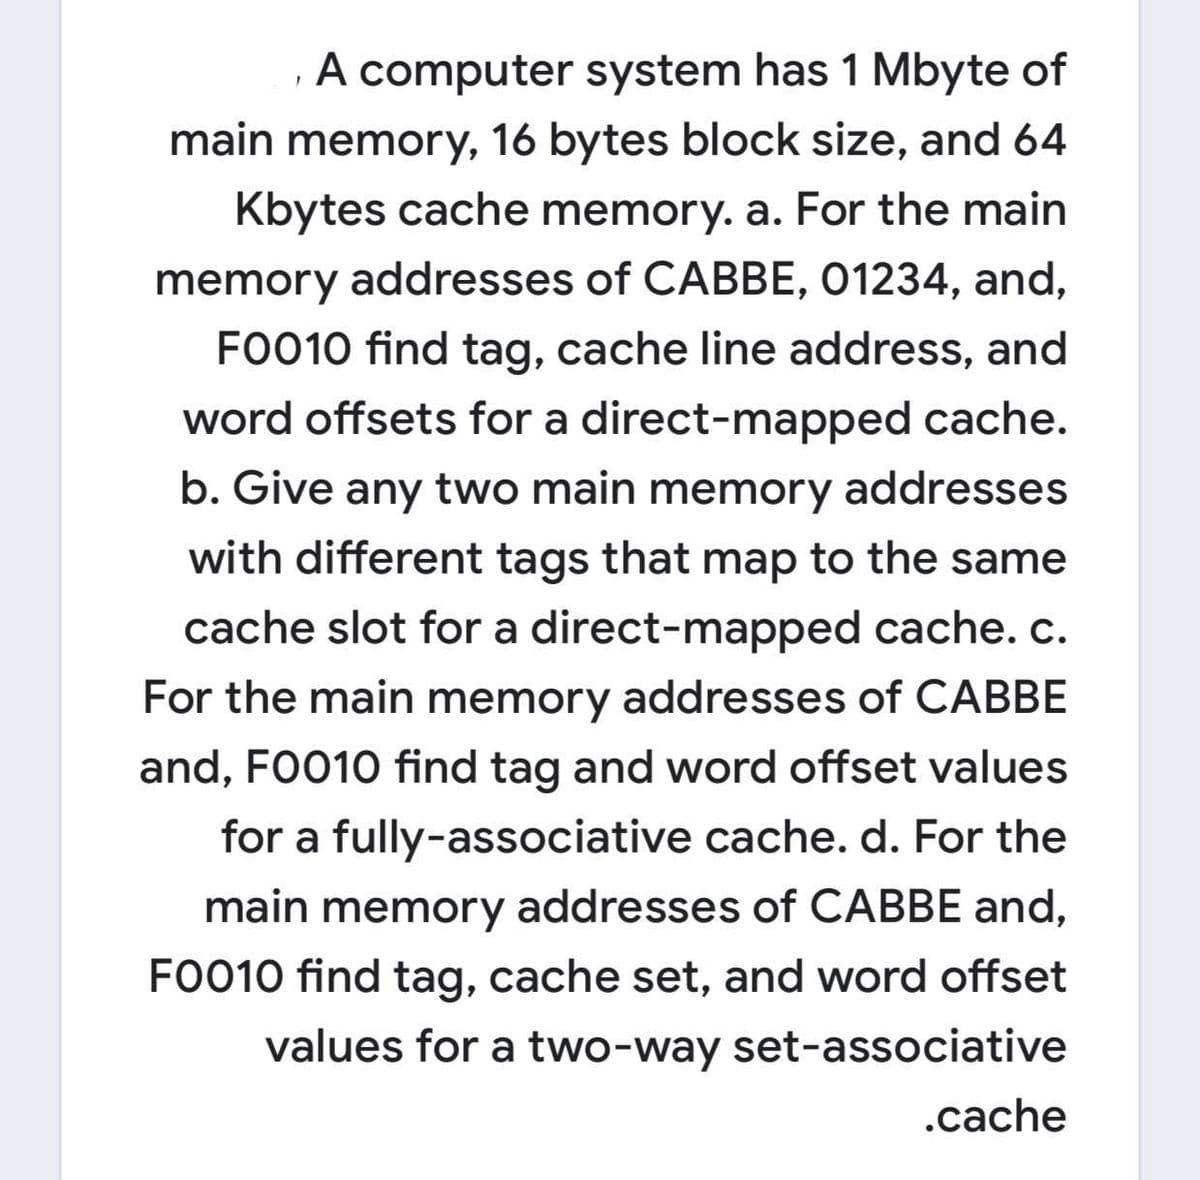 A computer system has 1 Mbyte of
main memory, 16 bytes block size, and 64
Kbytes cache memory. a. For the main
memory addresses of CABBE, 01234, and,
FO010 find tag, cache line address, and
word offsets for a direct-mapped cache.
b. Give any two main memory addresses
with different tags that map to the same
cache slot for a direct-mapped cache. c.
For the main memory addresses of CABBE
and, FO010 find tag and word offset values
for a fully-associative cache. d. For the
main memory addresses of CABBE and,
FO010 find tag, cache set, and word offset
values for a two-way set-associative
.cache
